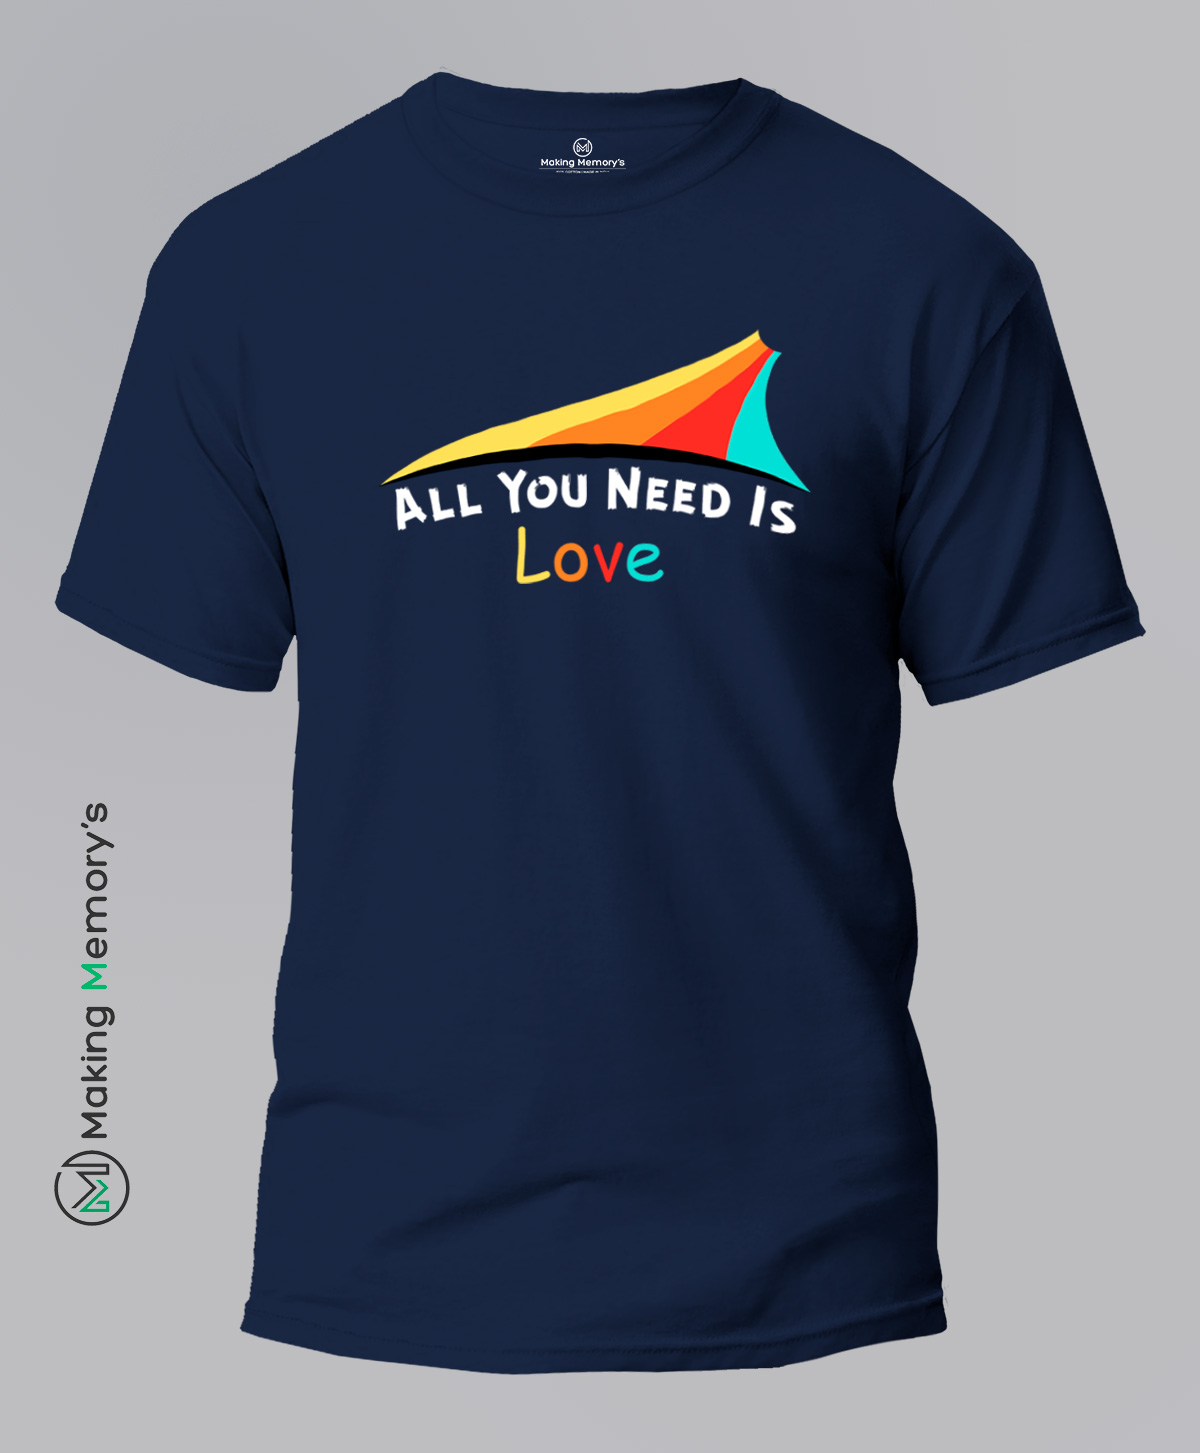 All-You-Need-Is-Love-Blue-T-Shirt